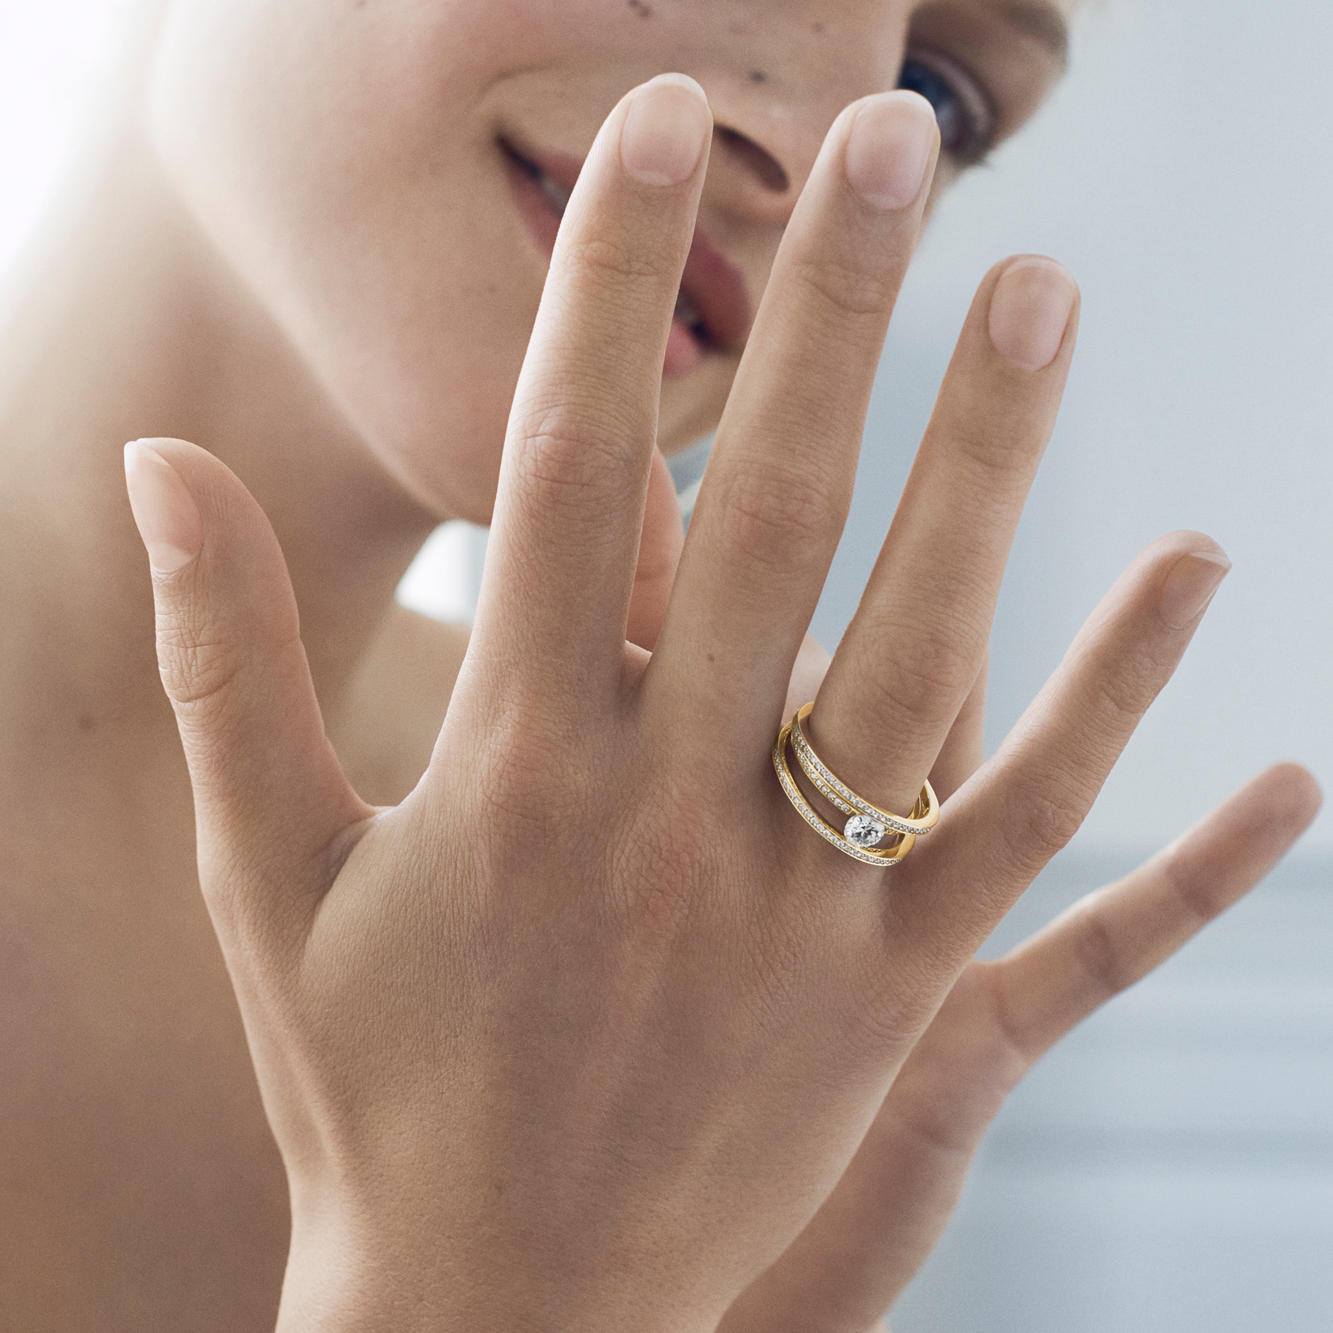 It is almost as if the Halo ring floats on your finger, and when you combine that with the twinkling diamonds and the magical way they reflect the light you get an effect like nothing else. Designed by @SophieBilleBraheltd. Explore more at: